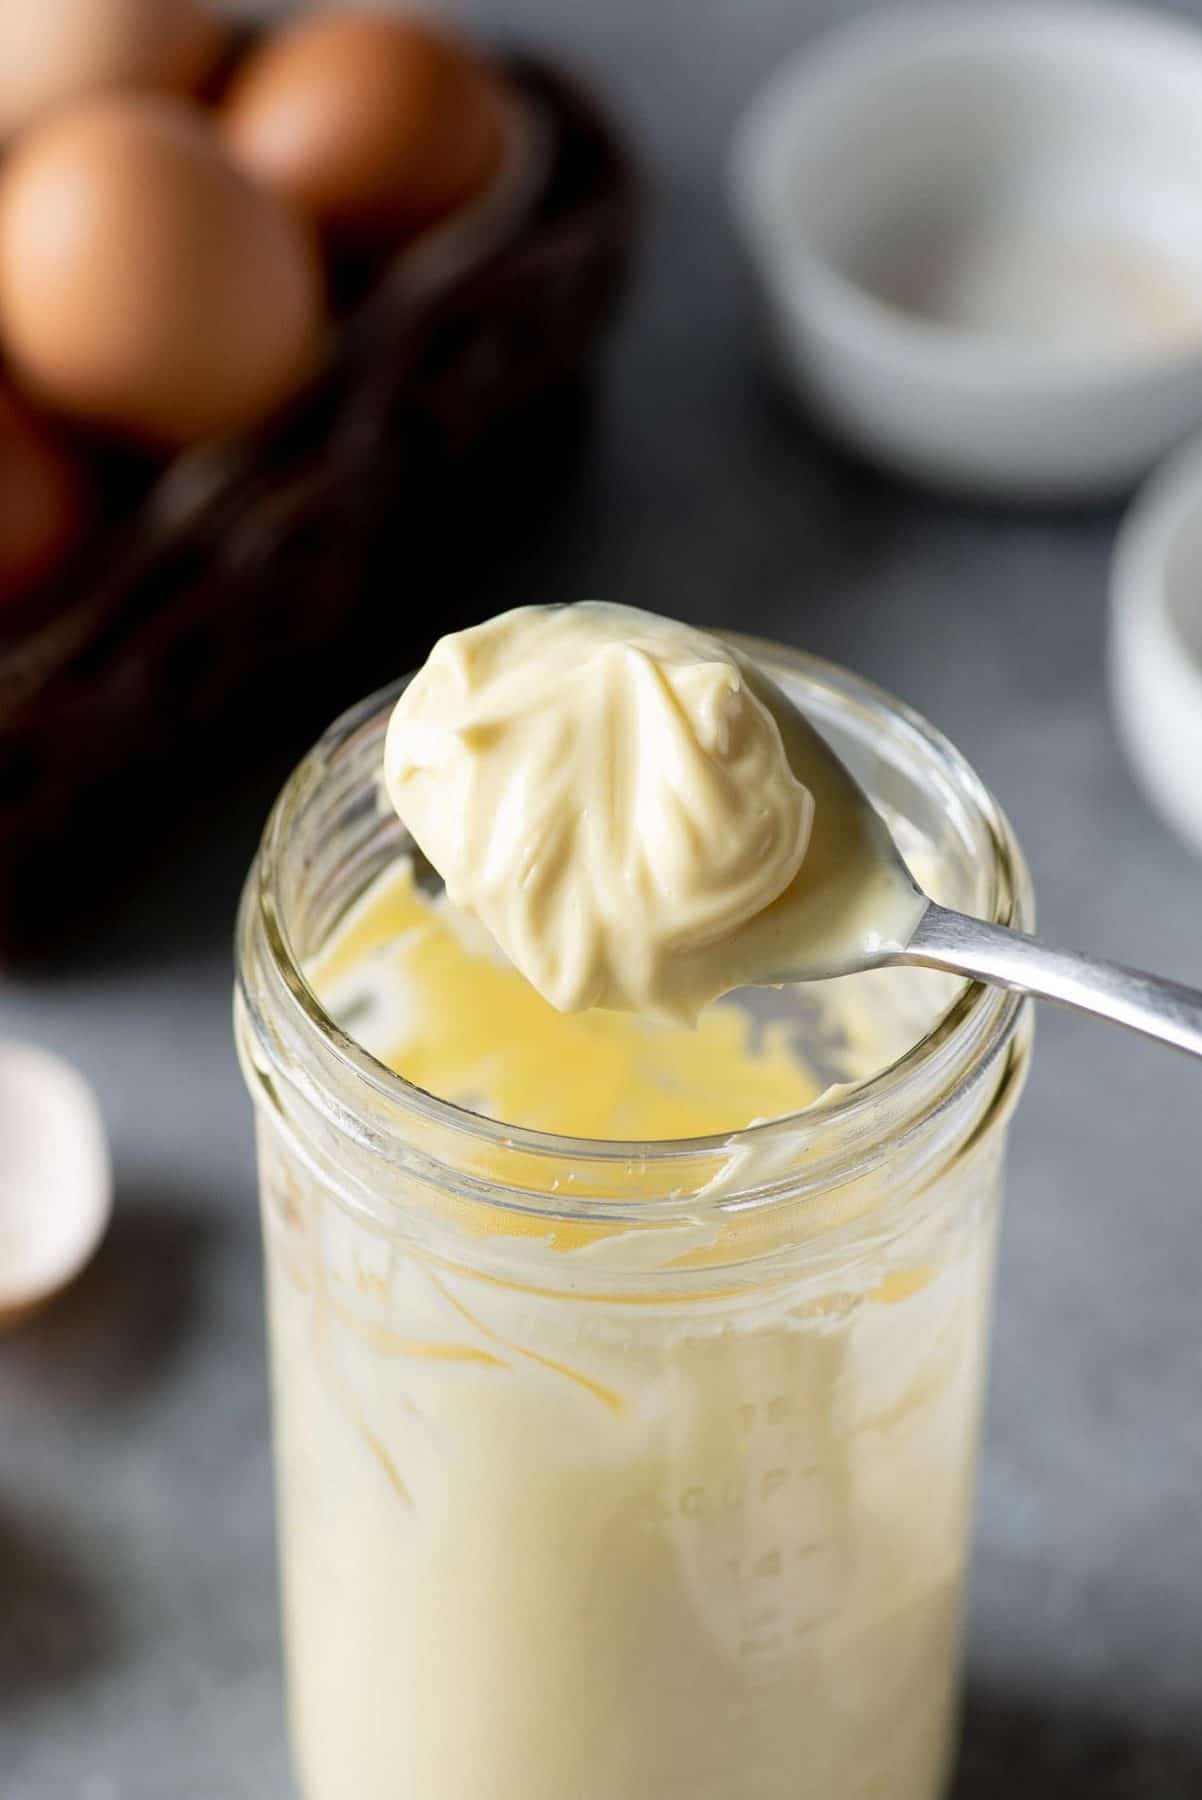 How to Make Homemade Mayo in Two Minutes